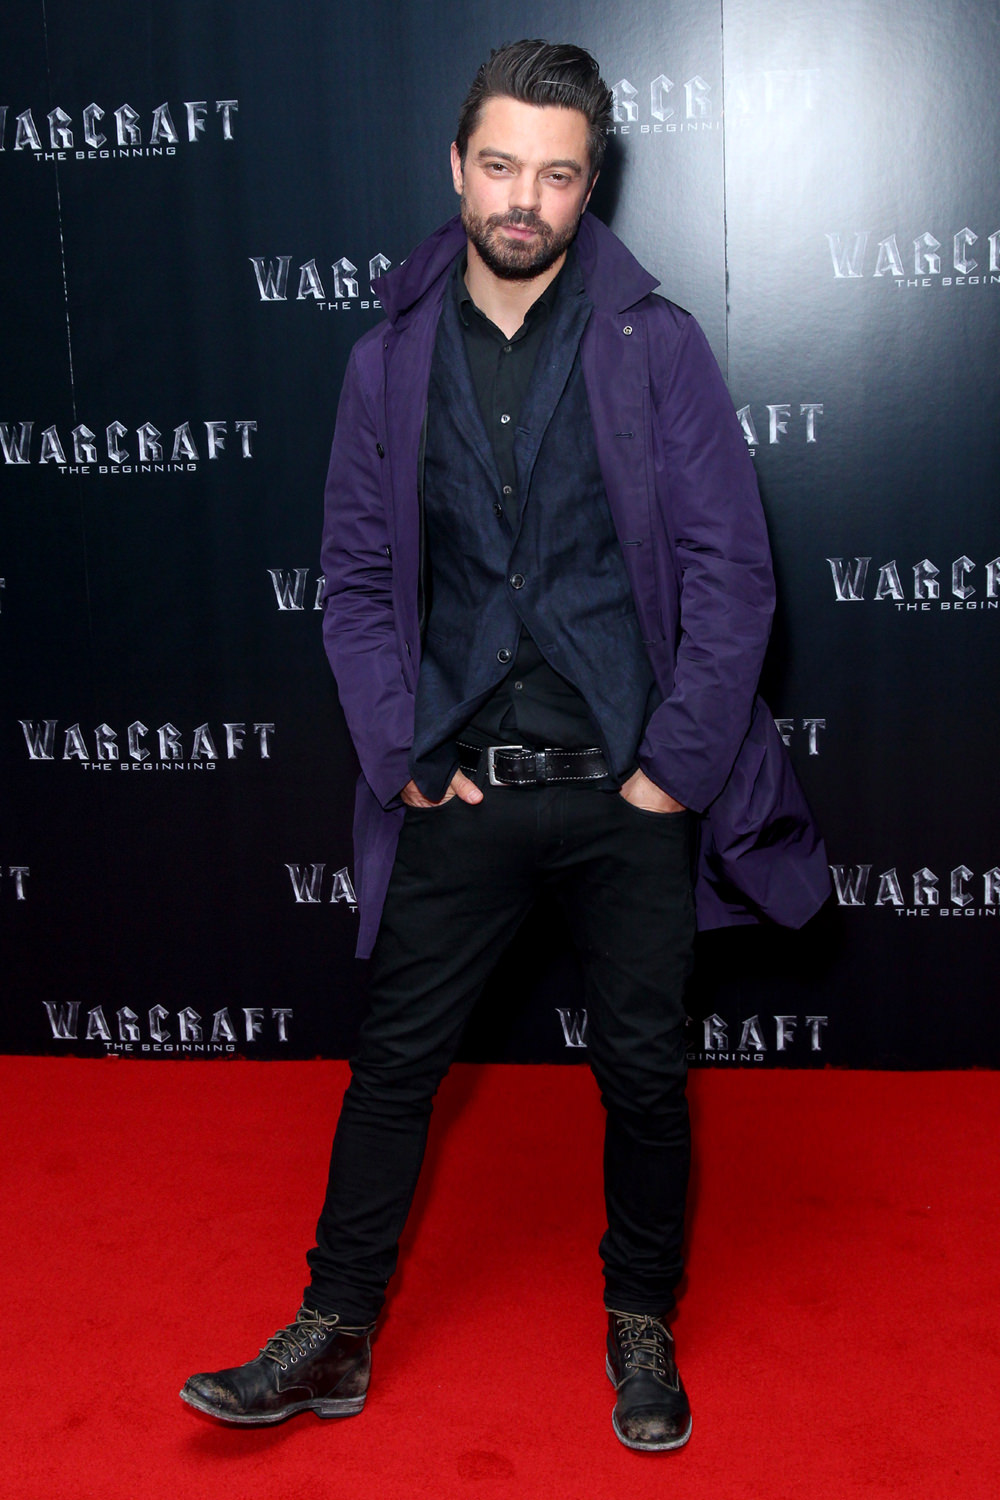 Dominic-Cooper-Warcraft-The-Beggining-Special-Screening-Red-Carpet-Fashion-Tom-Lorenzo-Site (1)